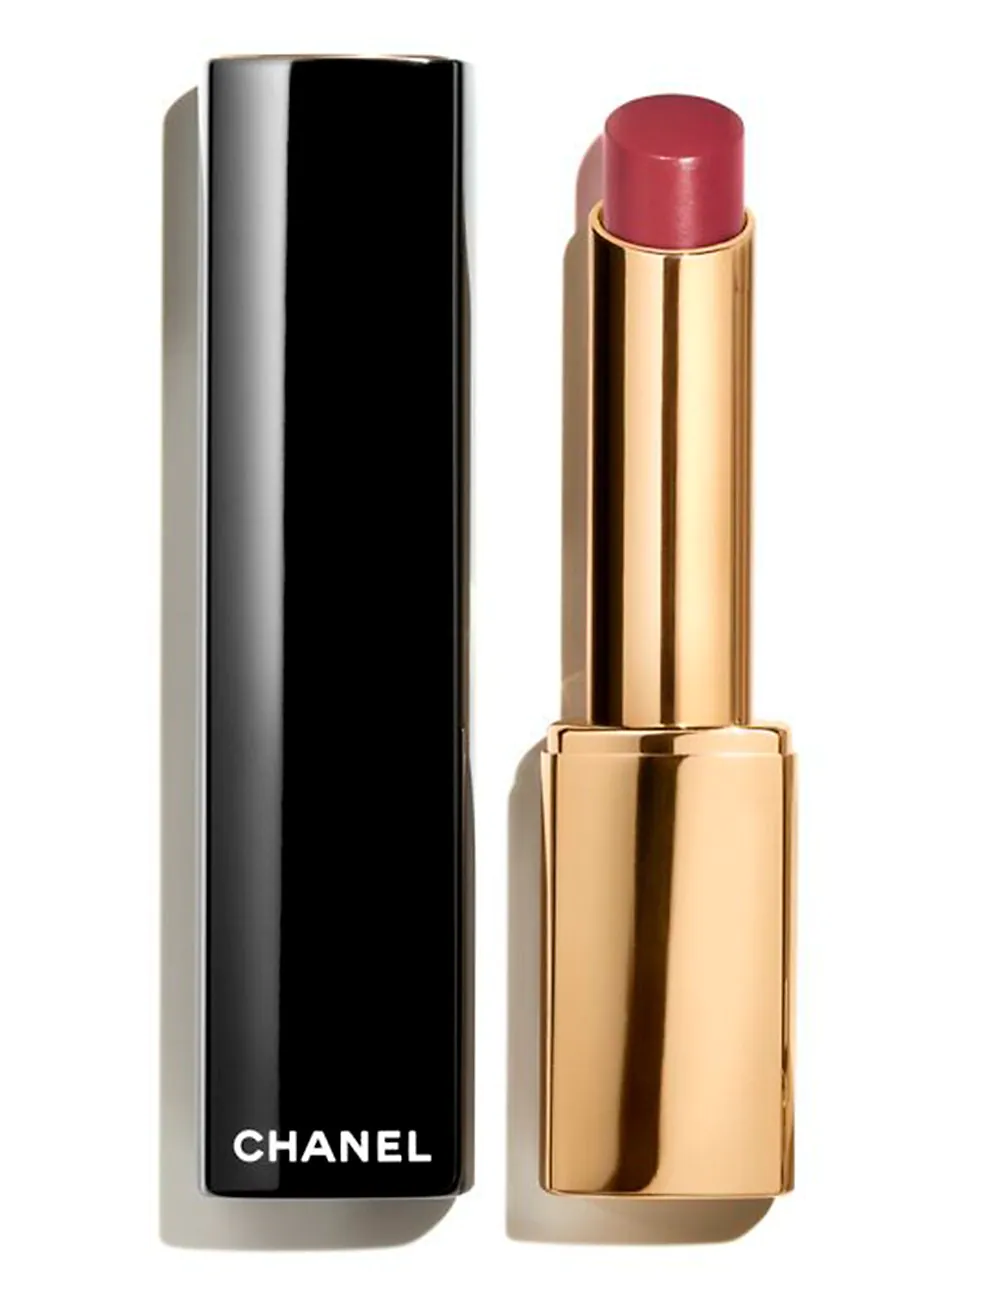 Chanel lipstick, beauty products, Saks Fifth Avenue